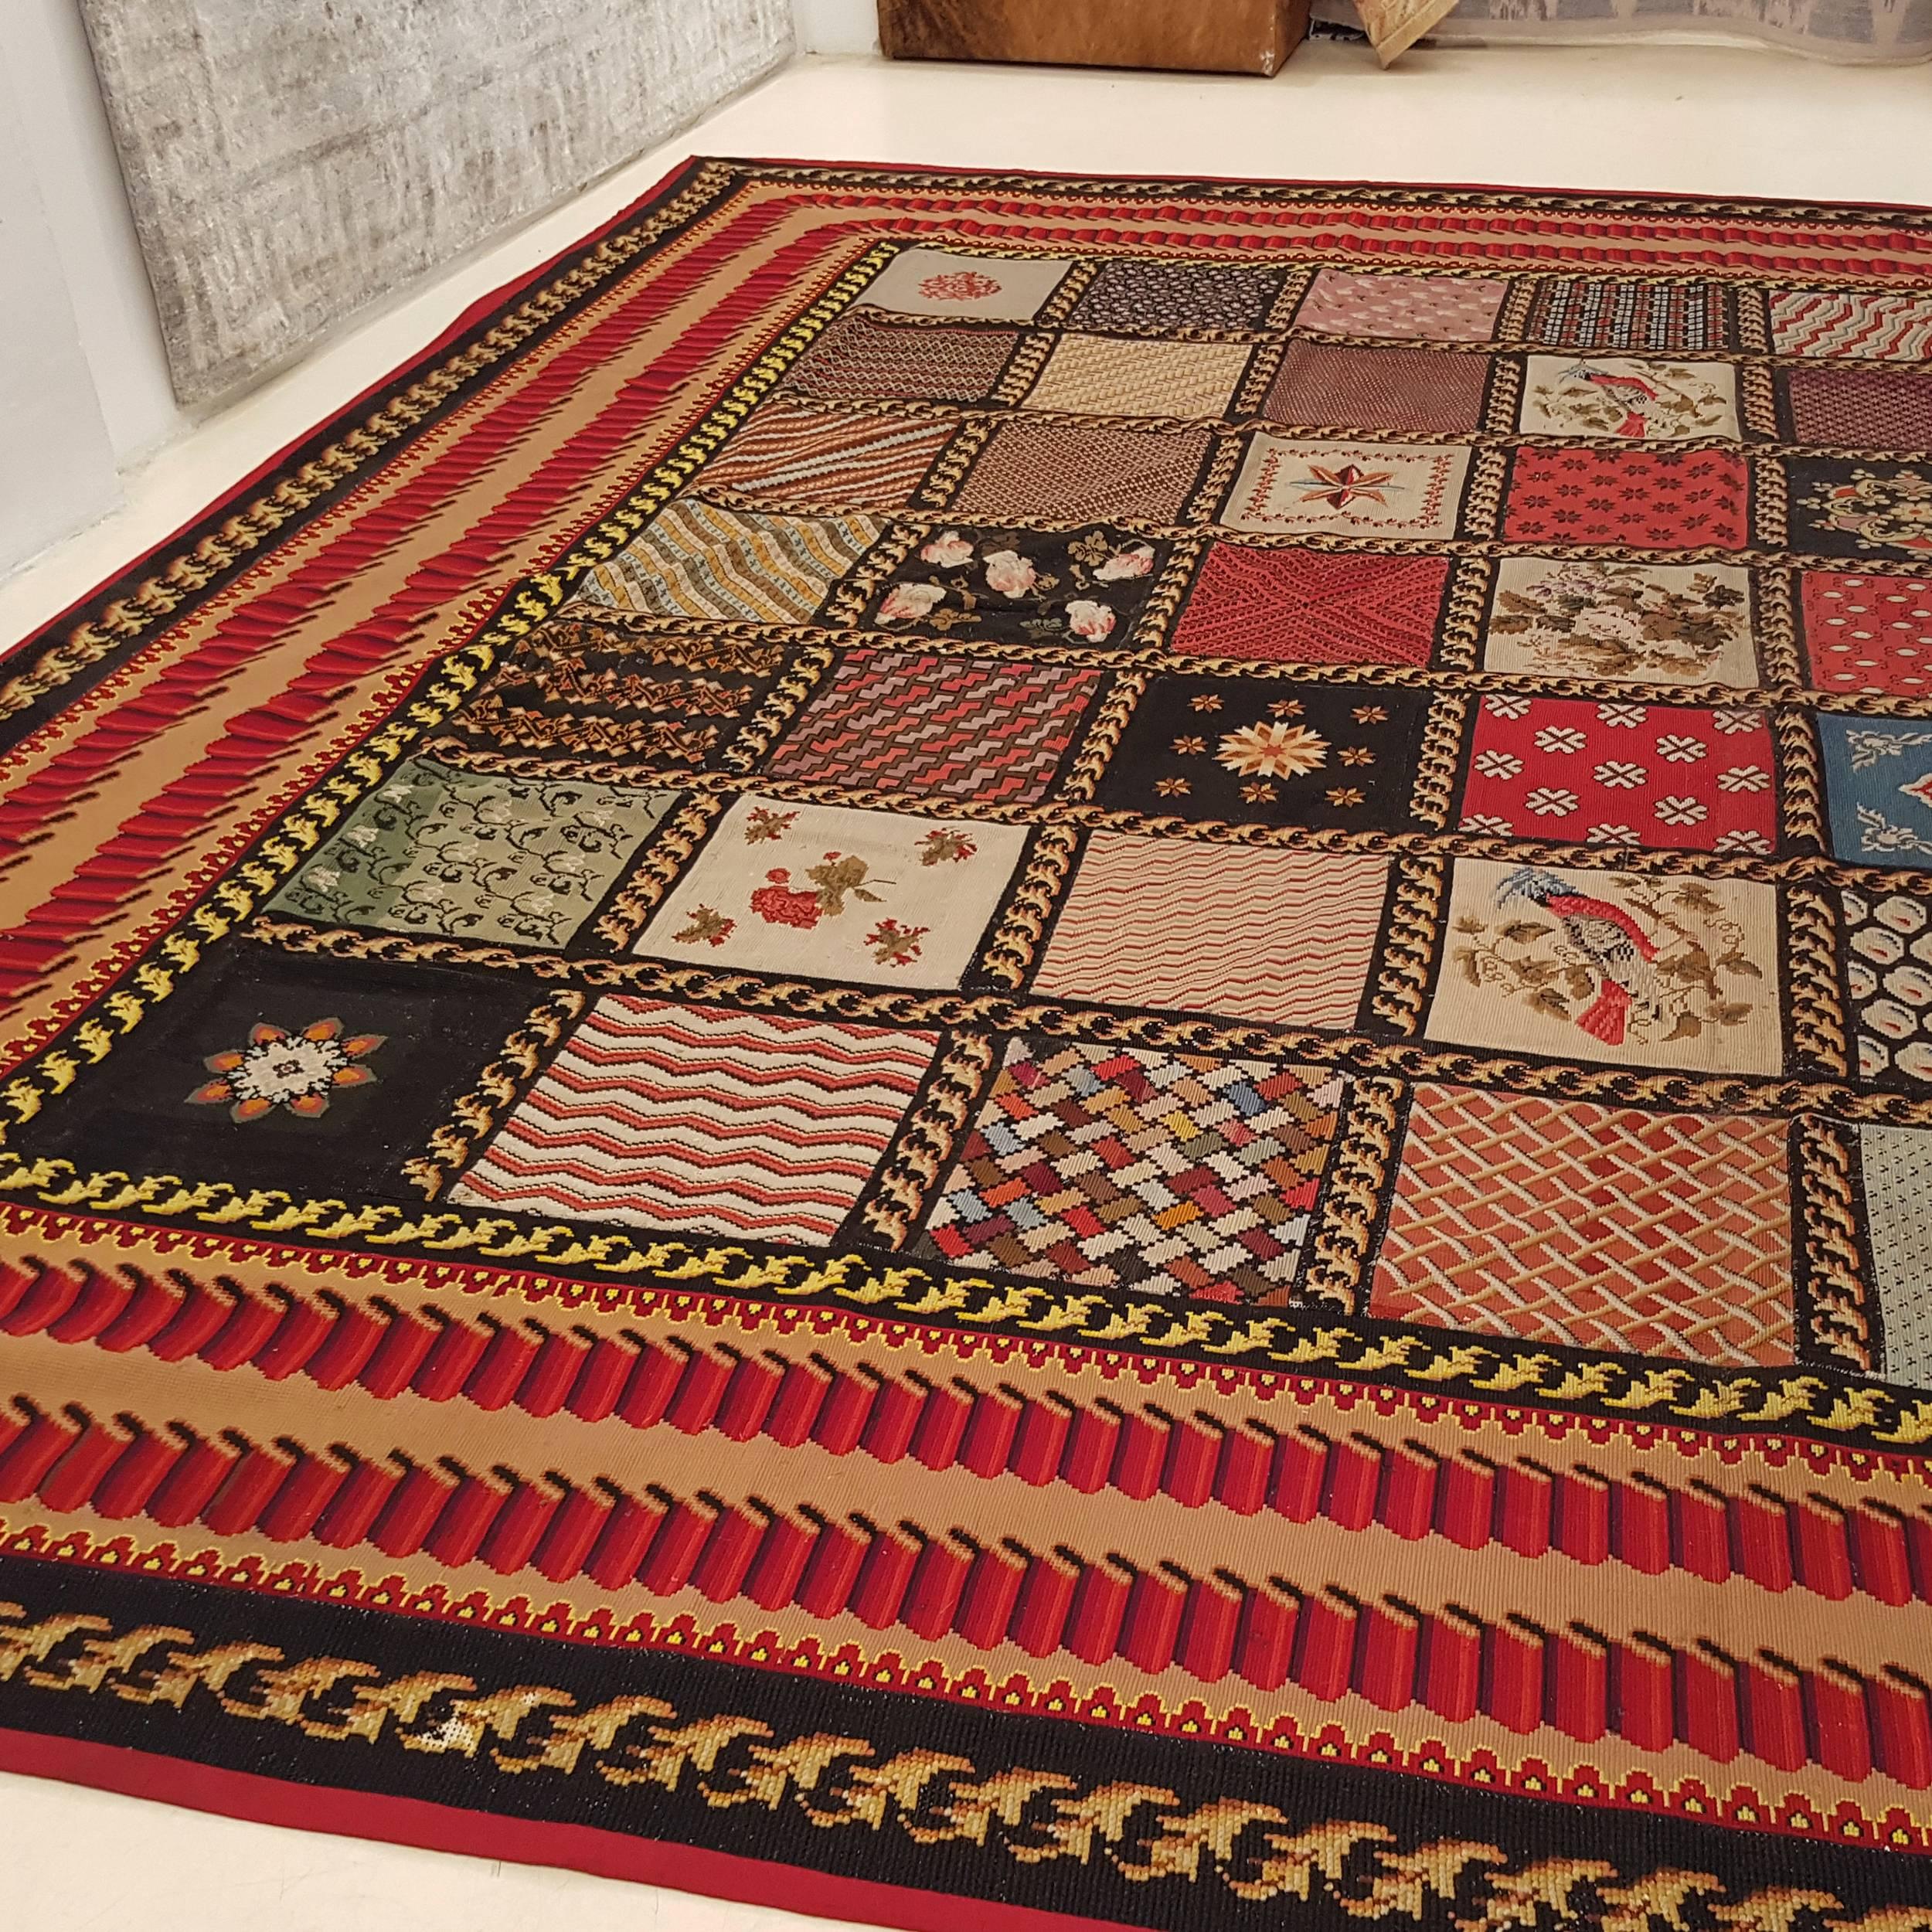 A large antique English needlepoint carpet decorated by the so-called 'album' pattern, composed of square compartments each containing a different pattern. This was the traditional way of weaving needlepoints, as the various embroiderers would each